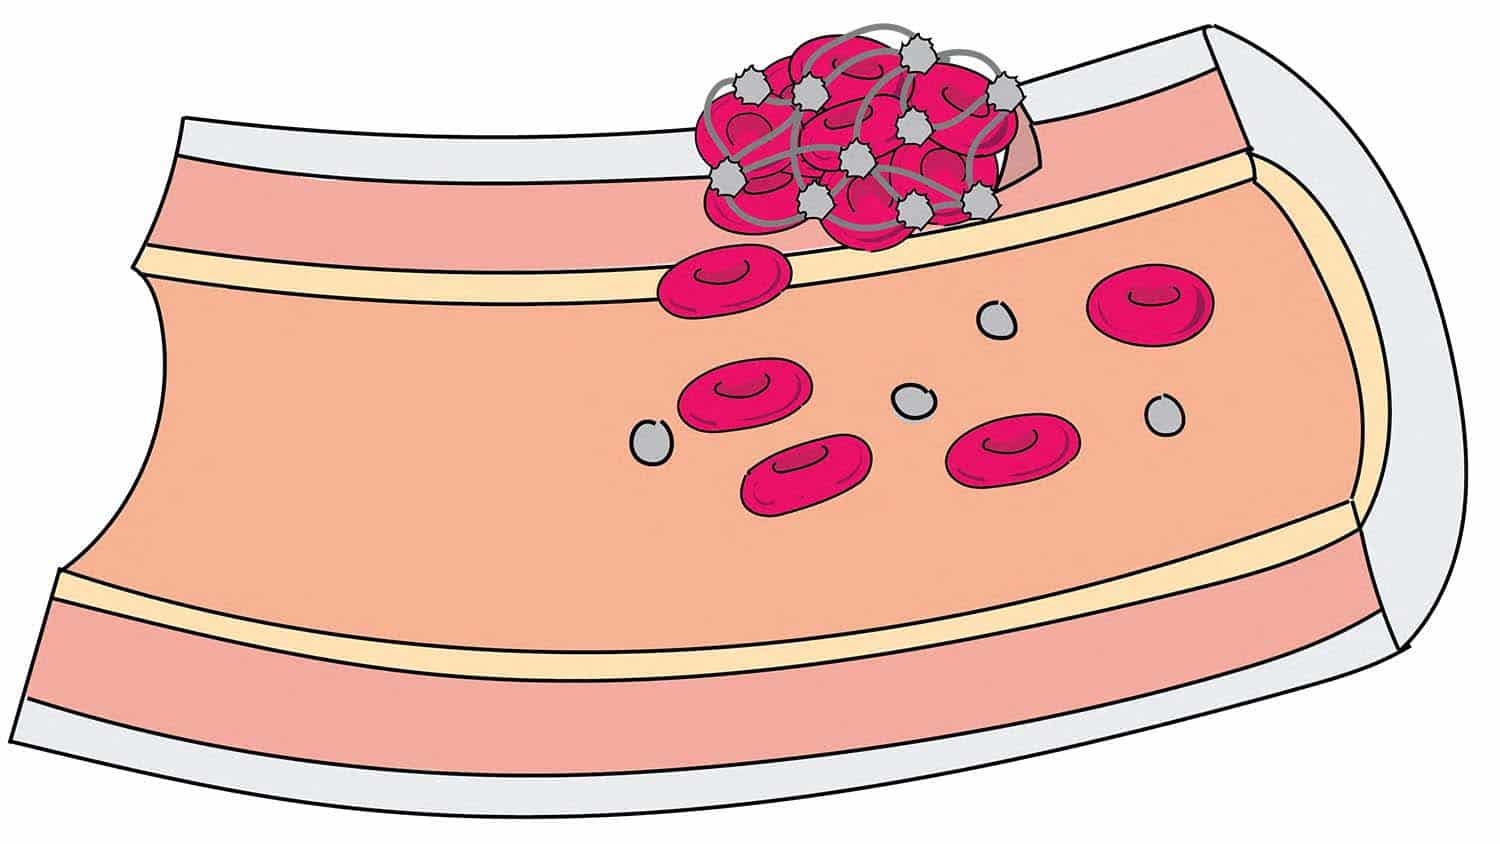 illustration shows platelets (white blobs) and red blood cells clotting at the site of a puncture in a blood vessel.